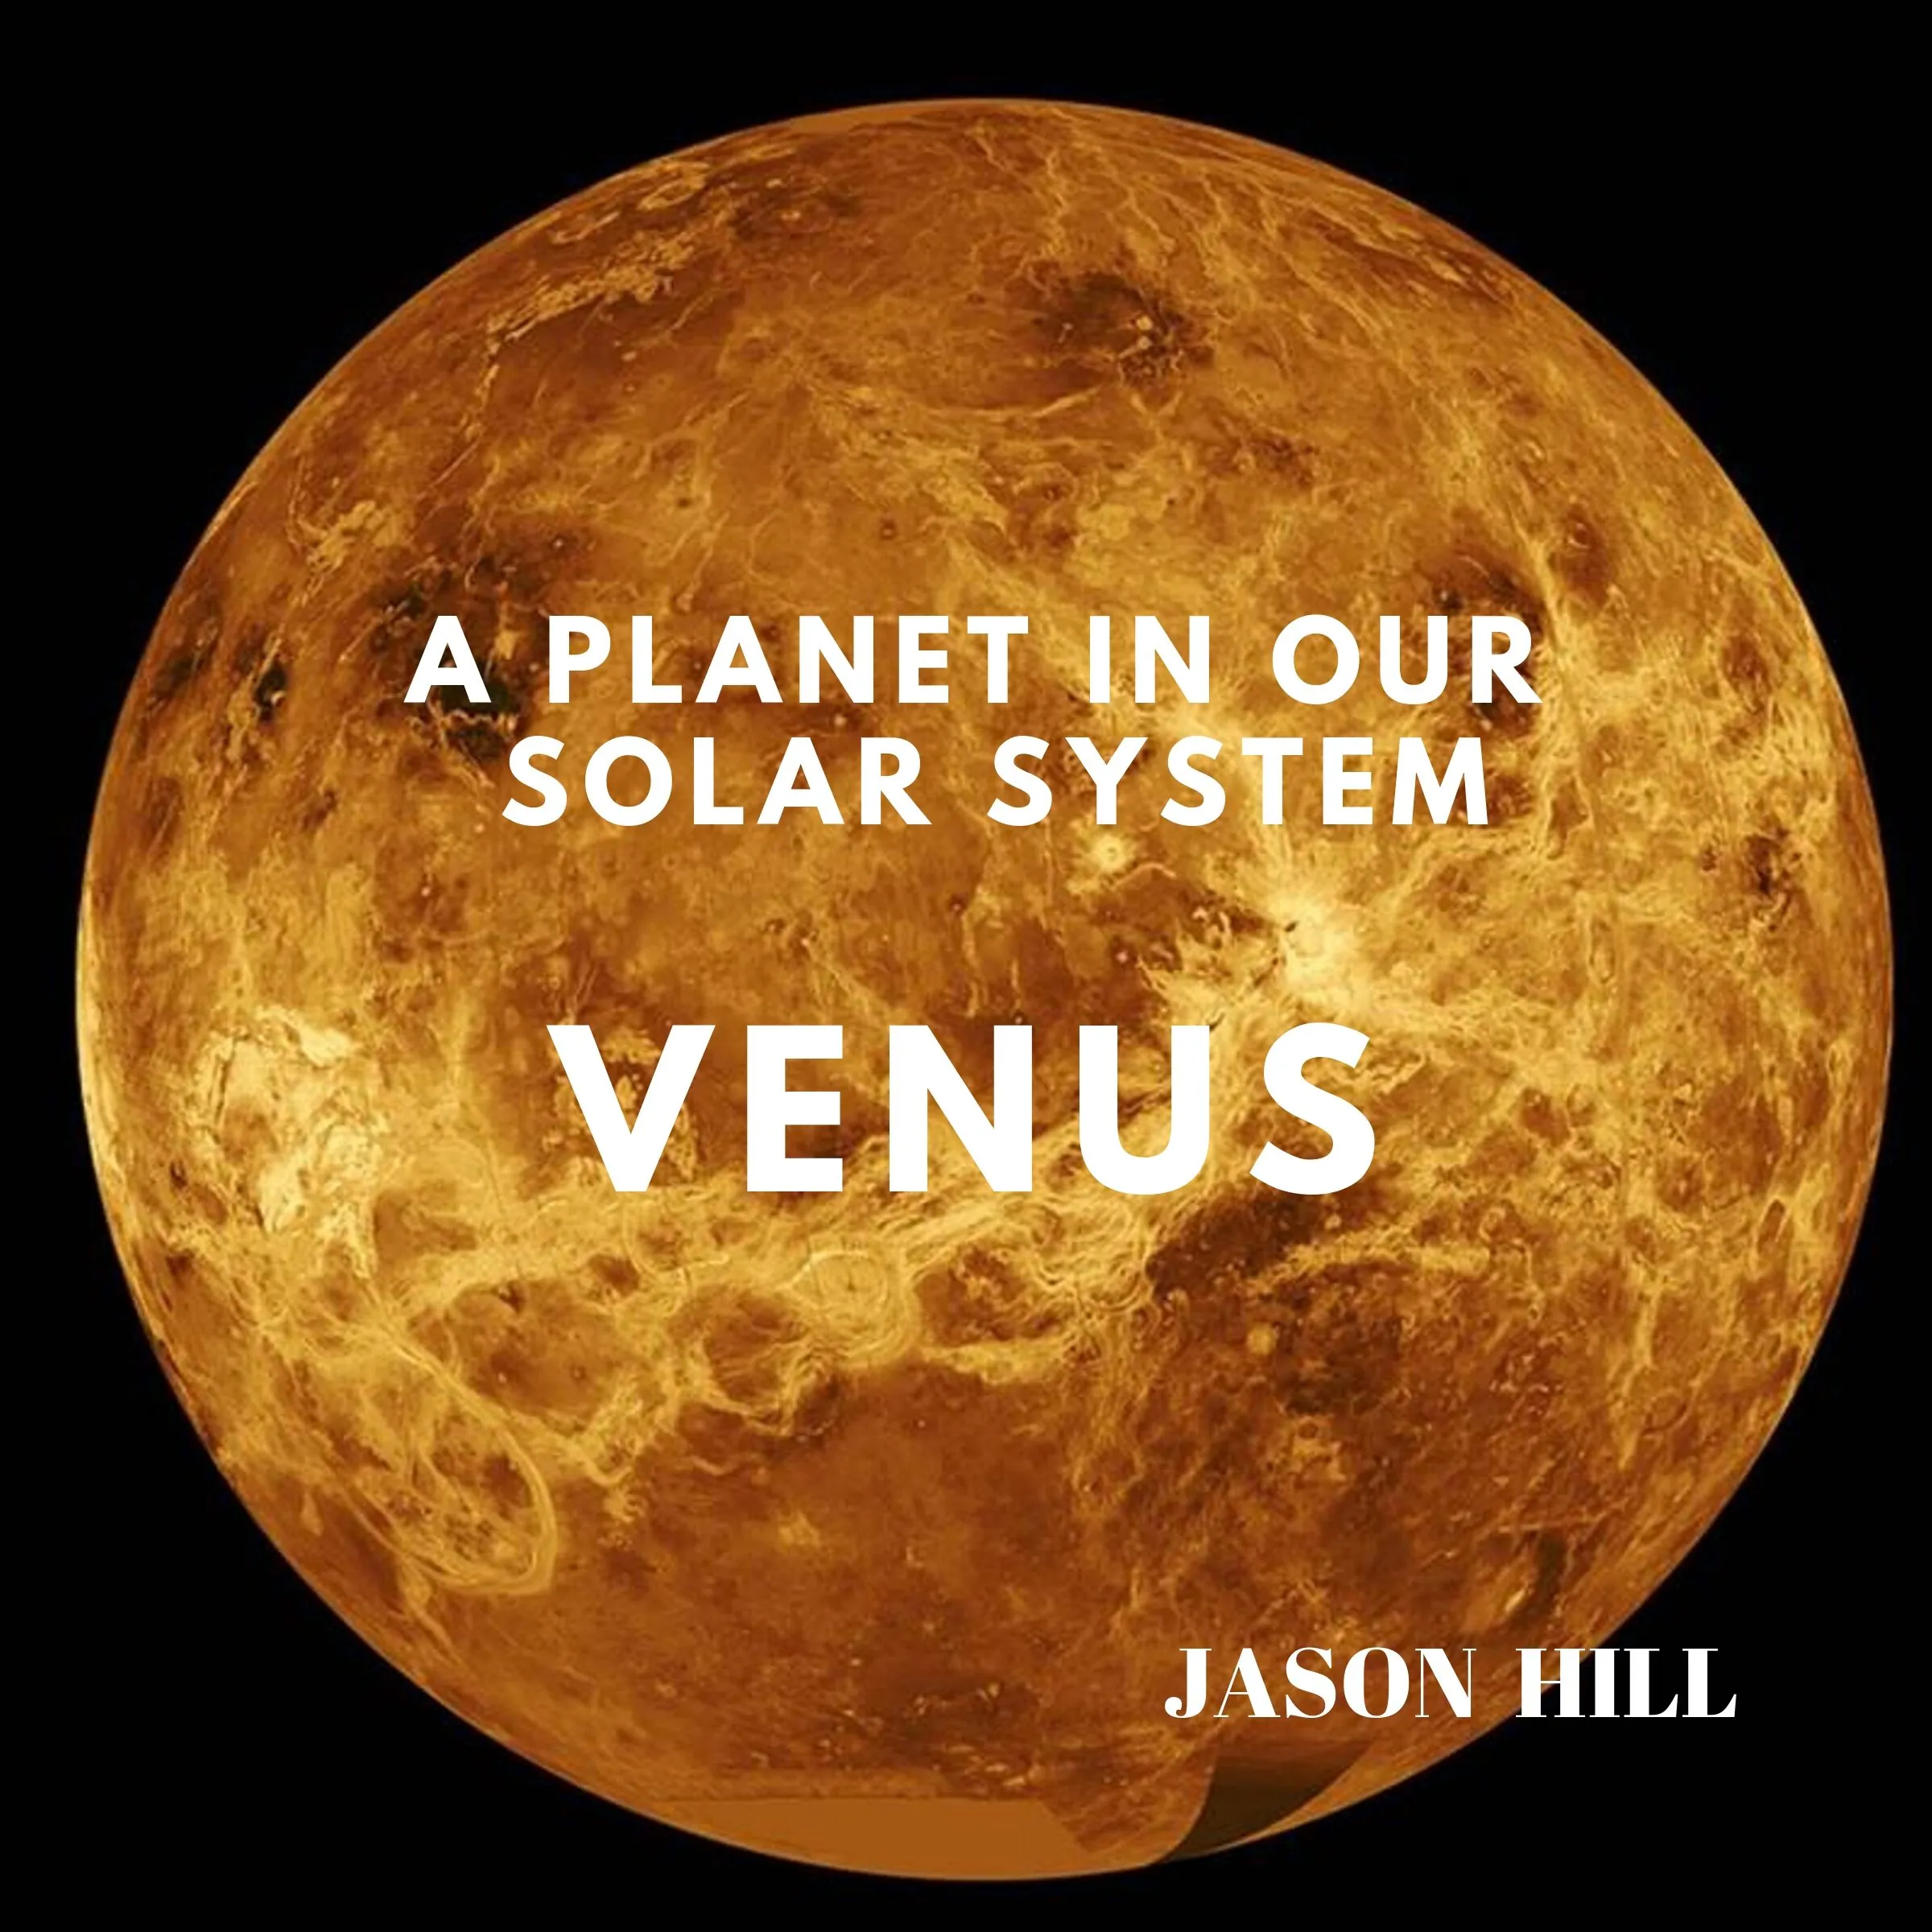 Venus: A Planet in our Solar System Audiobook by Jason Hill